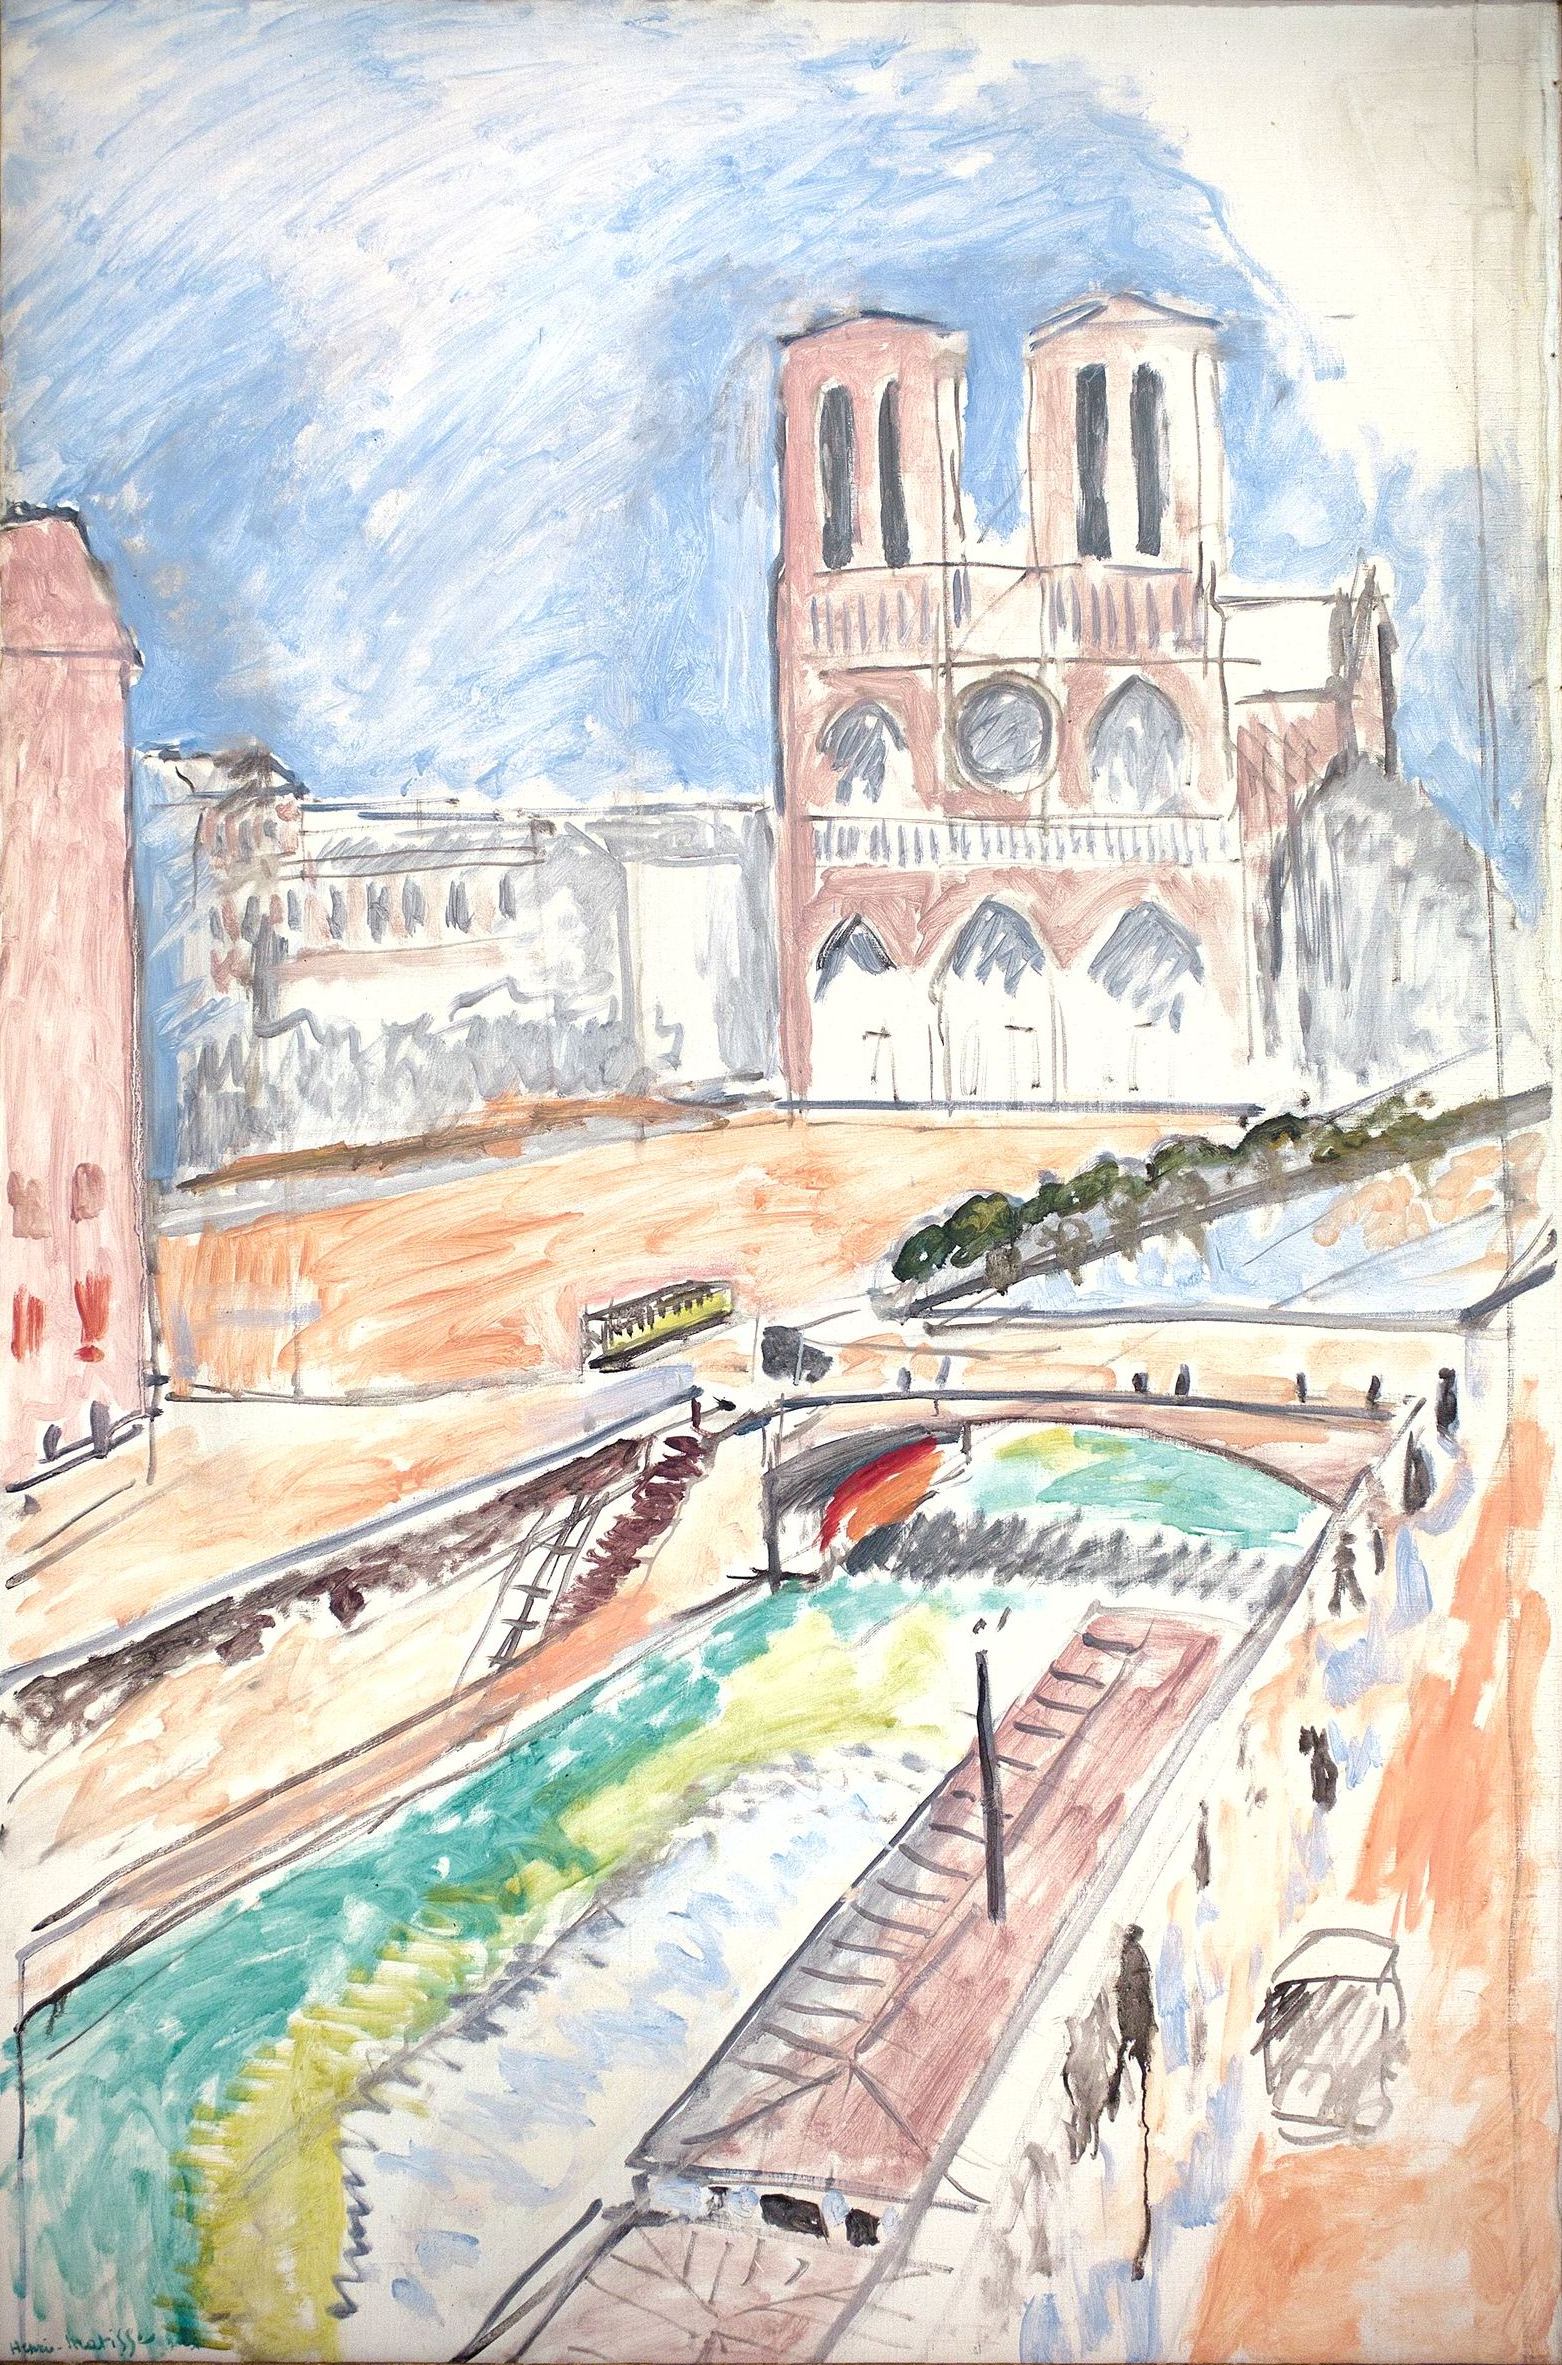 Henri Matisse (French, 1869–1954) Notre-Dame 1914 Oil on canvas 57 7/8 x 38 9/16 in. (147 x 98 cm) Kunstmuseum Solothurn, Du?bi-Mu?ller-Stiftung, Switzerland © 2012 Succession H. Matisse / Artists Rights Society (ARS), New York